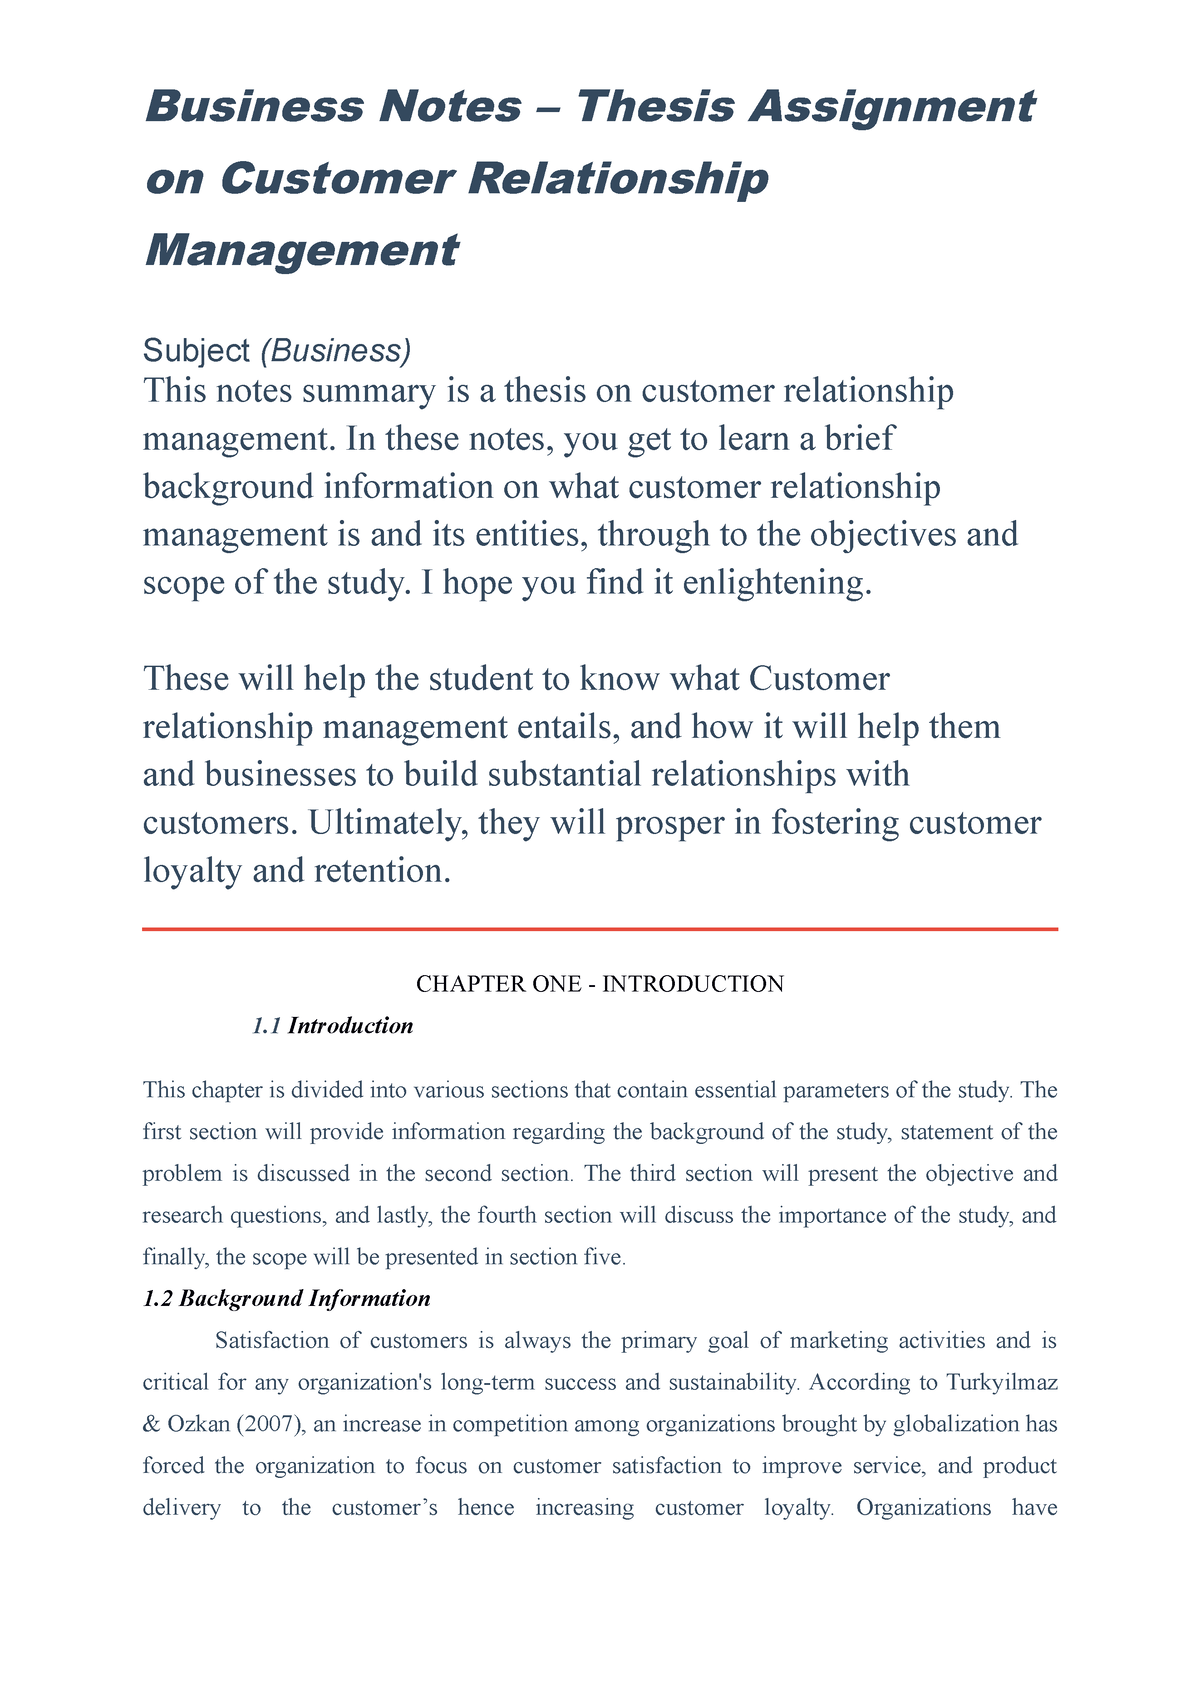 thesis on customer relationship management